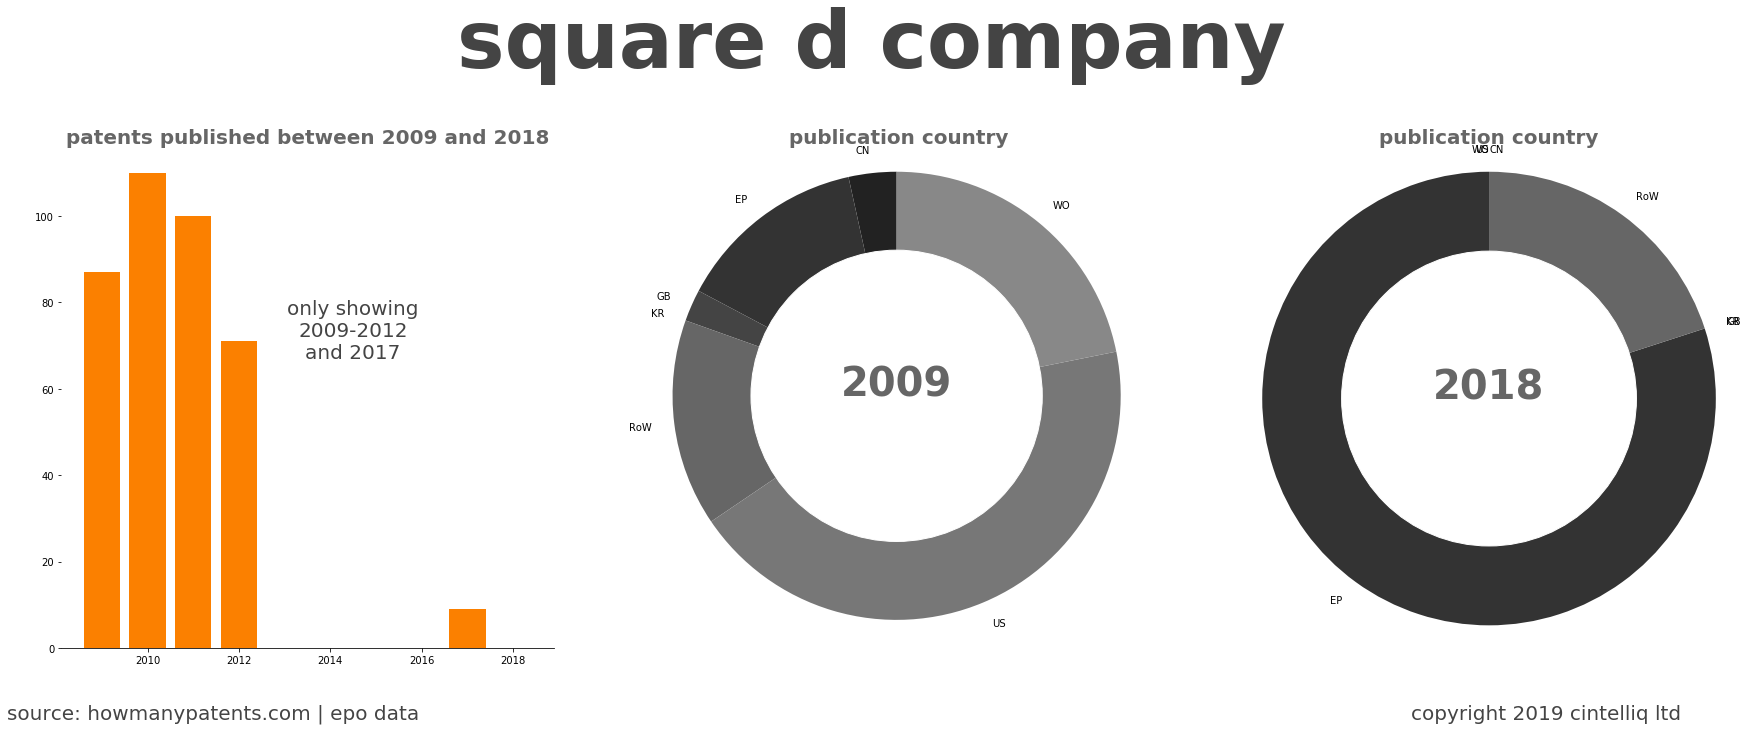 summary of patents for Square D Company